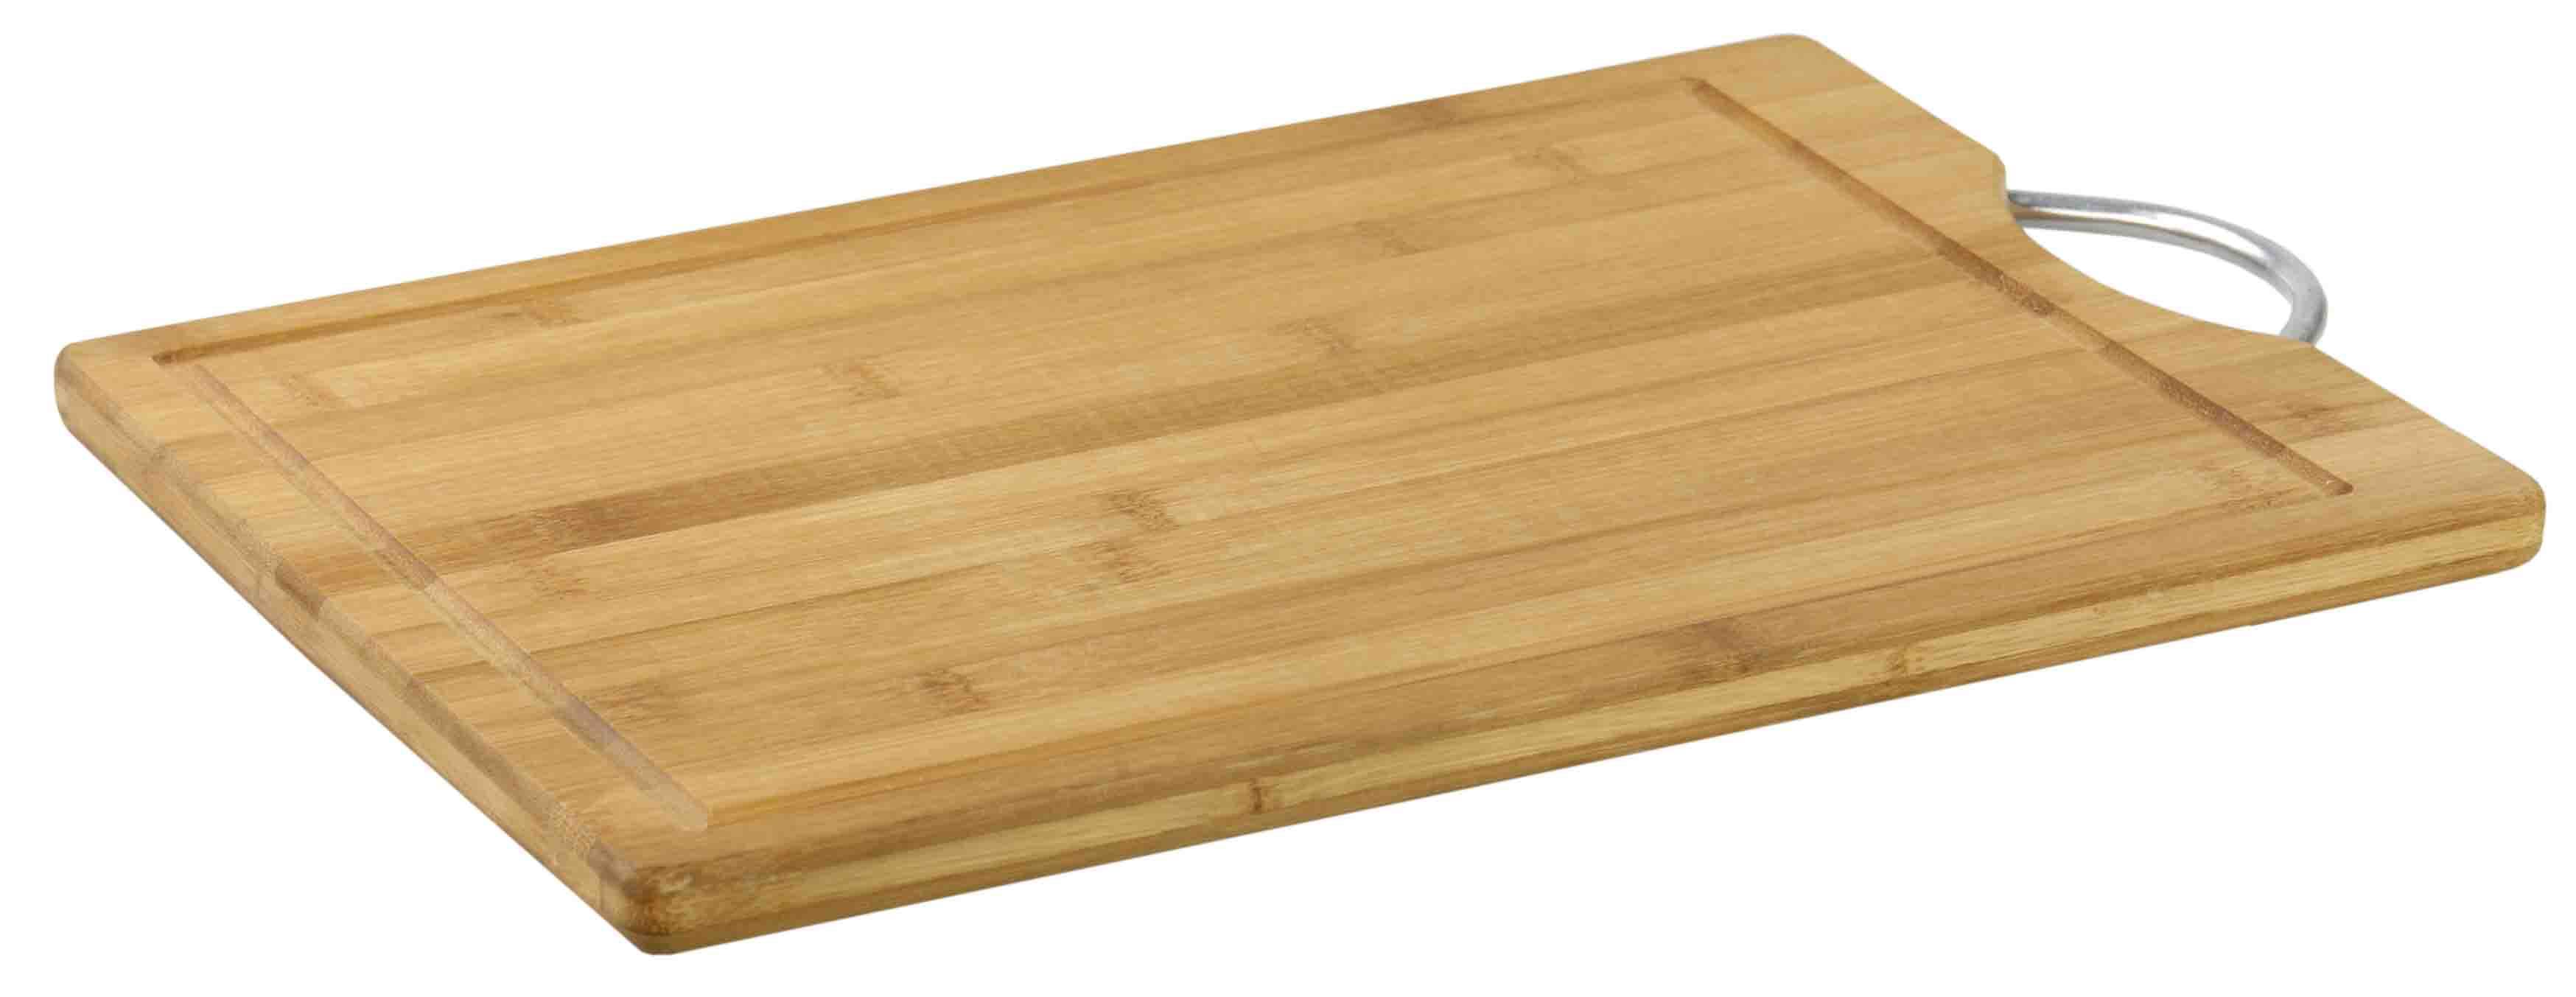 Home Basics Bamboo Cutting Board - with Handle Large, 16"